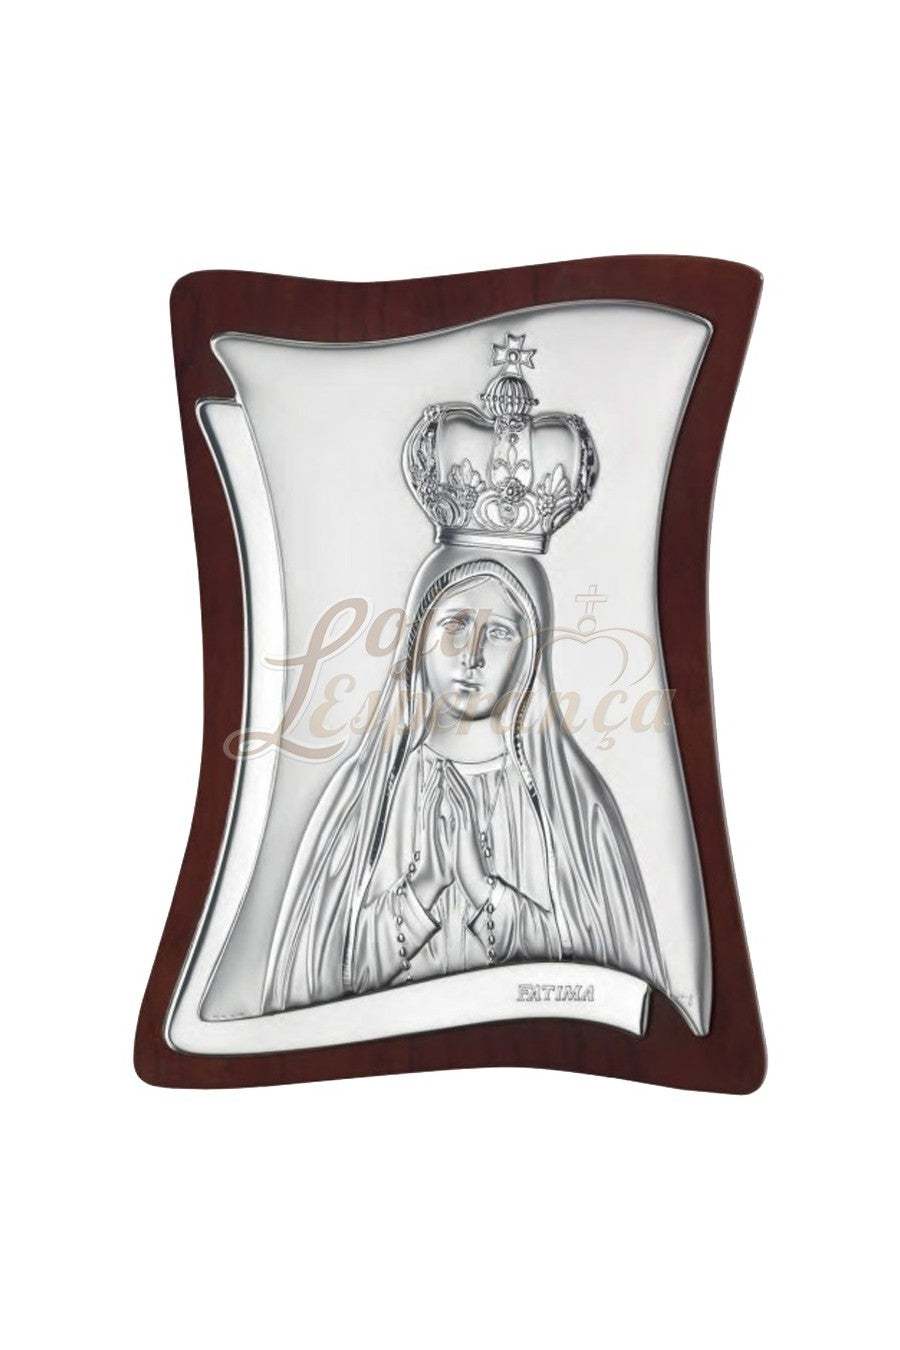 Our Lady of Fatima Silver frame